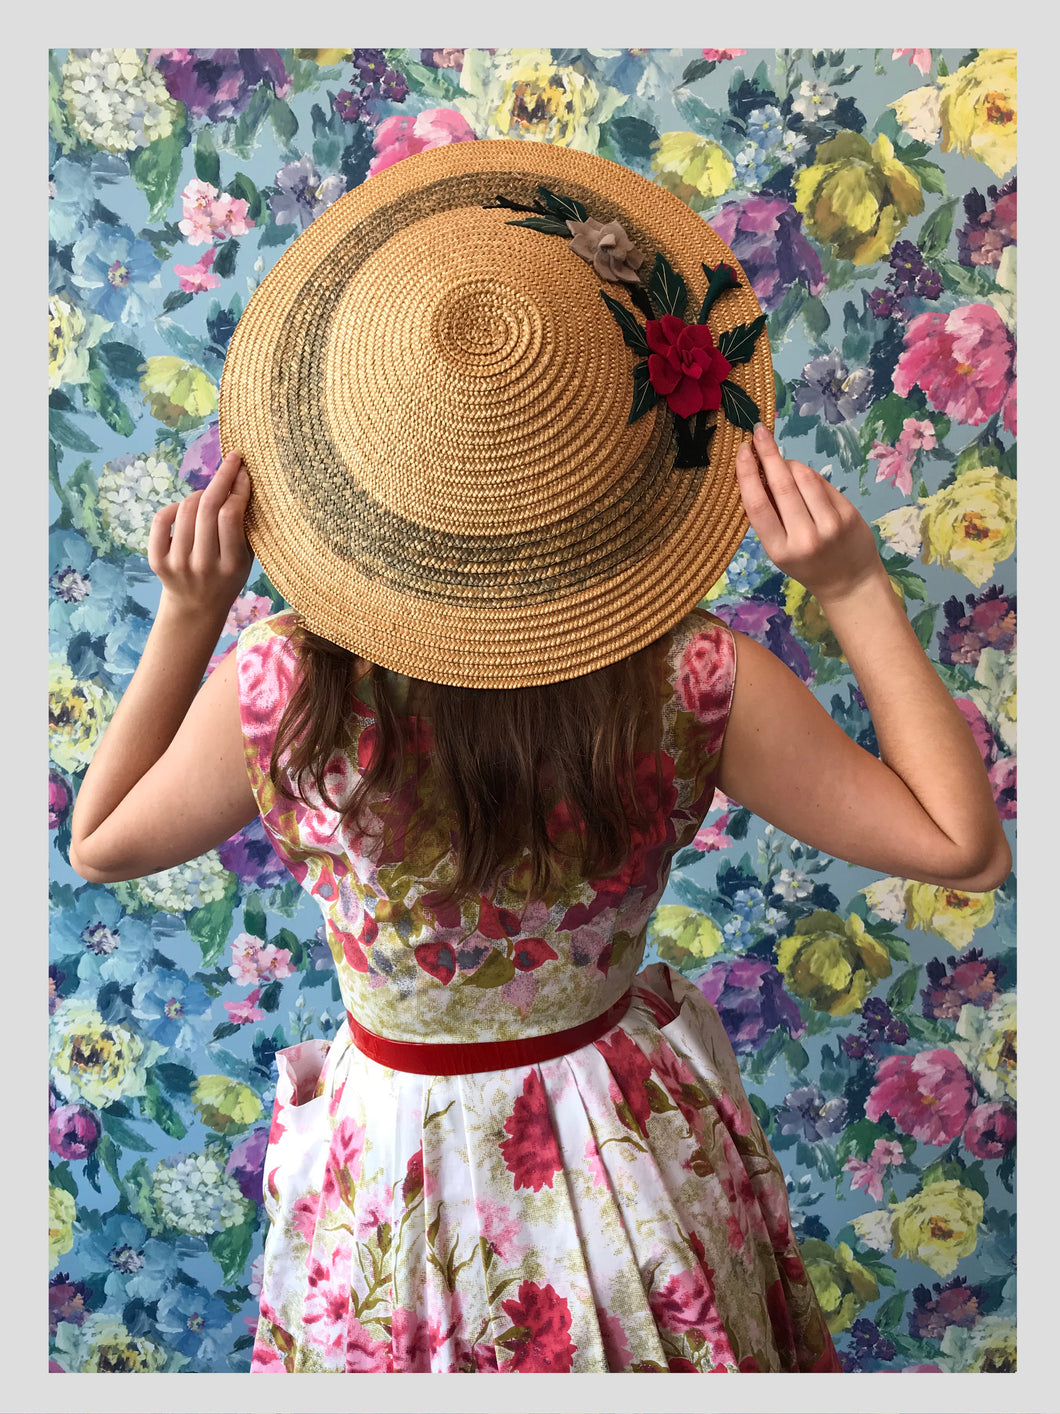 Straw Conical Style Sunhat w/ Felt Flowers from Dress, in Bridport